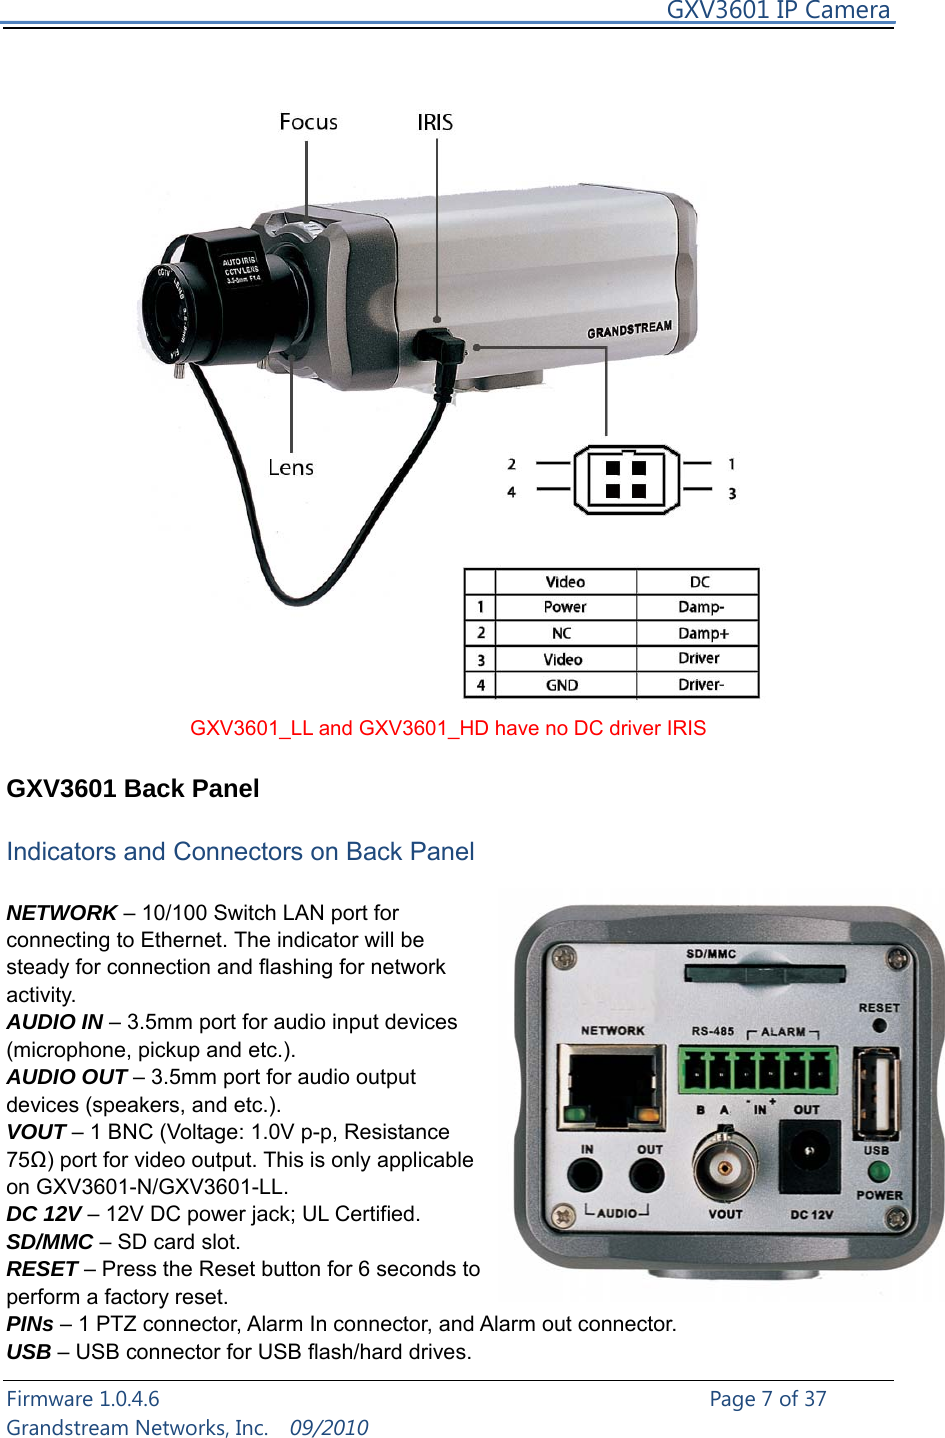     GXV3601 IP Camera Firmware 1.0.4.6                                                   Page 7 of 37     Grandstream Networks, Inc.  09/2010   GXV3601_LL and GXV3601_HD have no DC driver IRIS  GXV3601 Back Panel  Indicators and Connectors on Back Panel  NETWORK – 10/100 Switch LAN port for connecting to Ethernet. The indicator will be steady for connection and flashing for network activity. AUDIO IN – 3.5mm port for audio input devices (microphone, pickup and etc.). AUDIO OUT – 3.5mm port for audio output devices (speakers, and etc.). VOUT – 1 BNC (Voltage: 1.0V p-p, Resistance 75Ω) port for video output. This is only applicable on GXV3601-N/GXV3601-LL. DC 12V – 12V DC power jack; UL Certified. SD/MMC – SD card slot. RESET – Press the Reset button for 6 seconds to perform a factory reset. PINs – 1 PTZ connector, Alarm In connector, and Alarm out connector. USB – USB connector for USB flash/hard drives. 